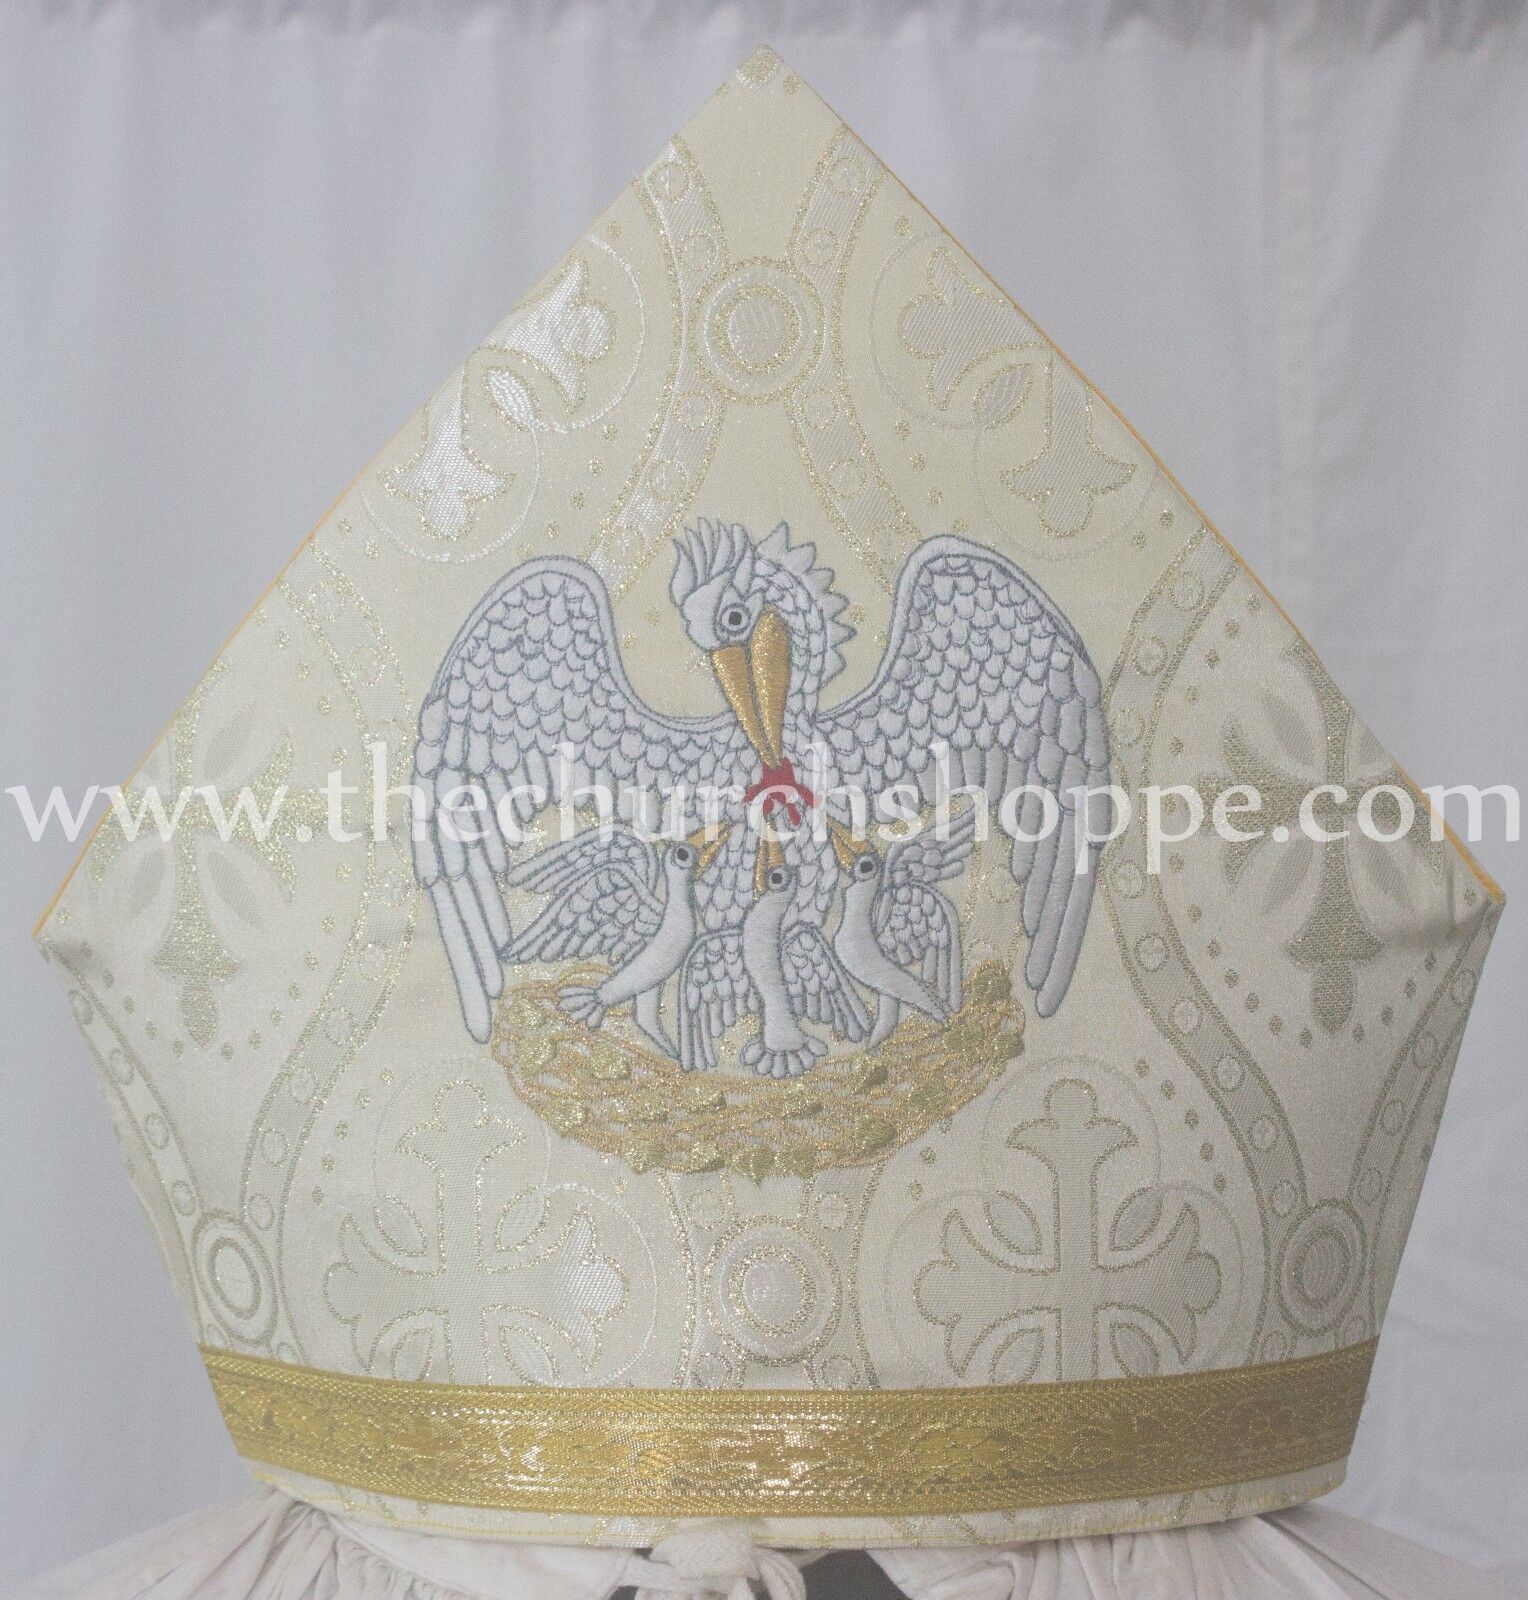 New Metallic Gold Mitre with PELICAN embroidery,mitra,Bishop's Mitre, New